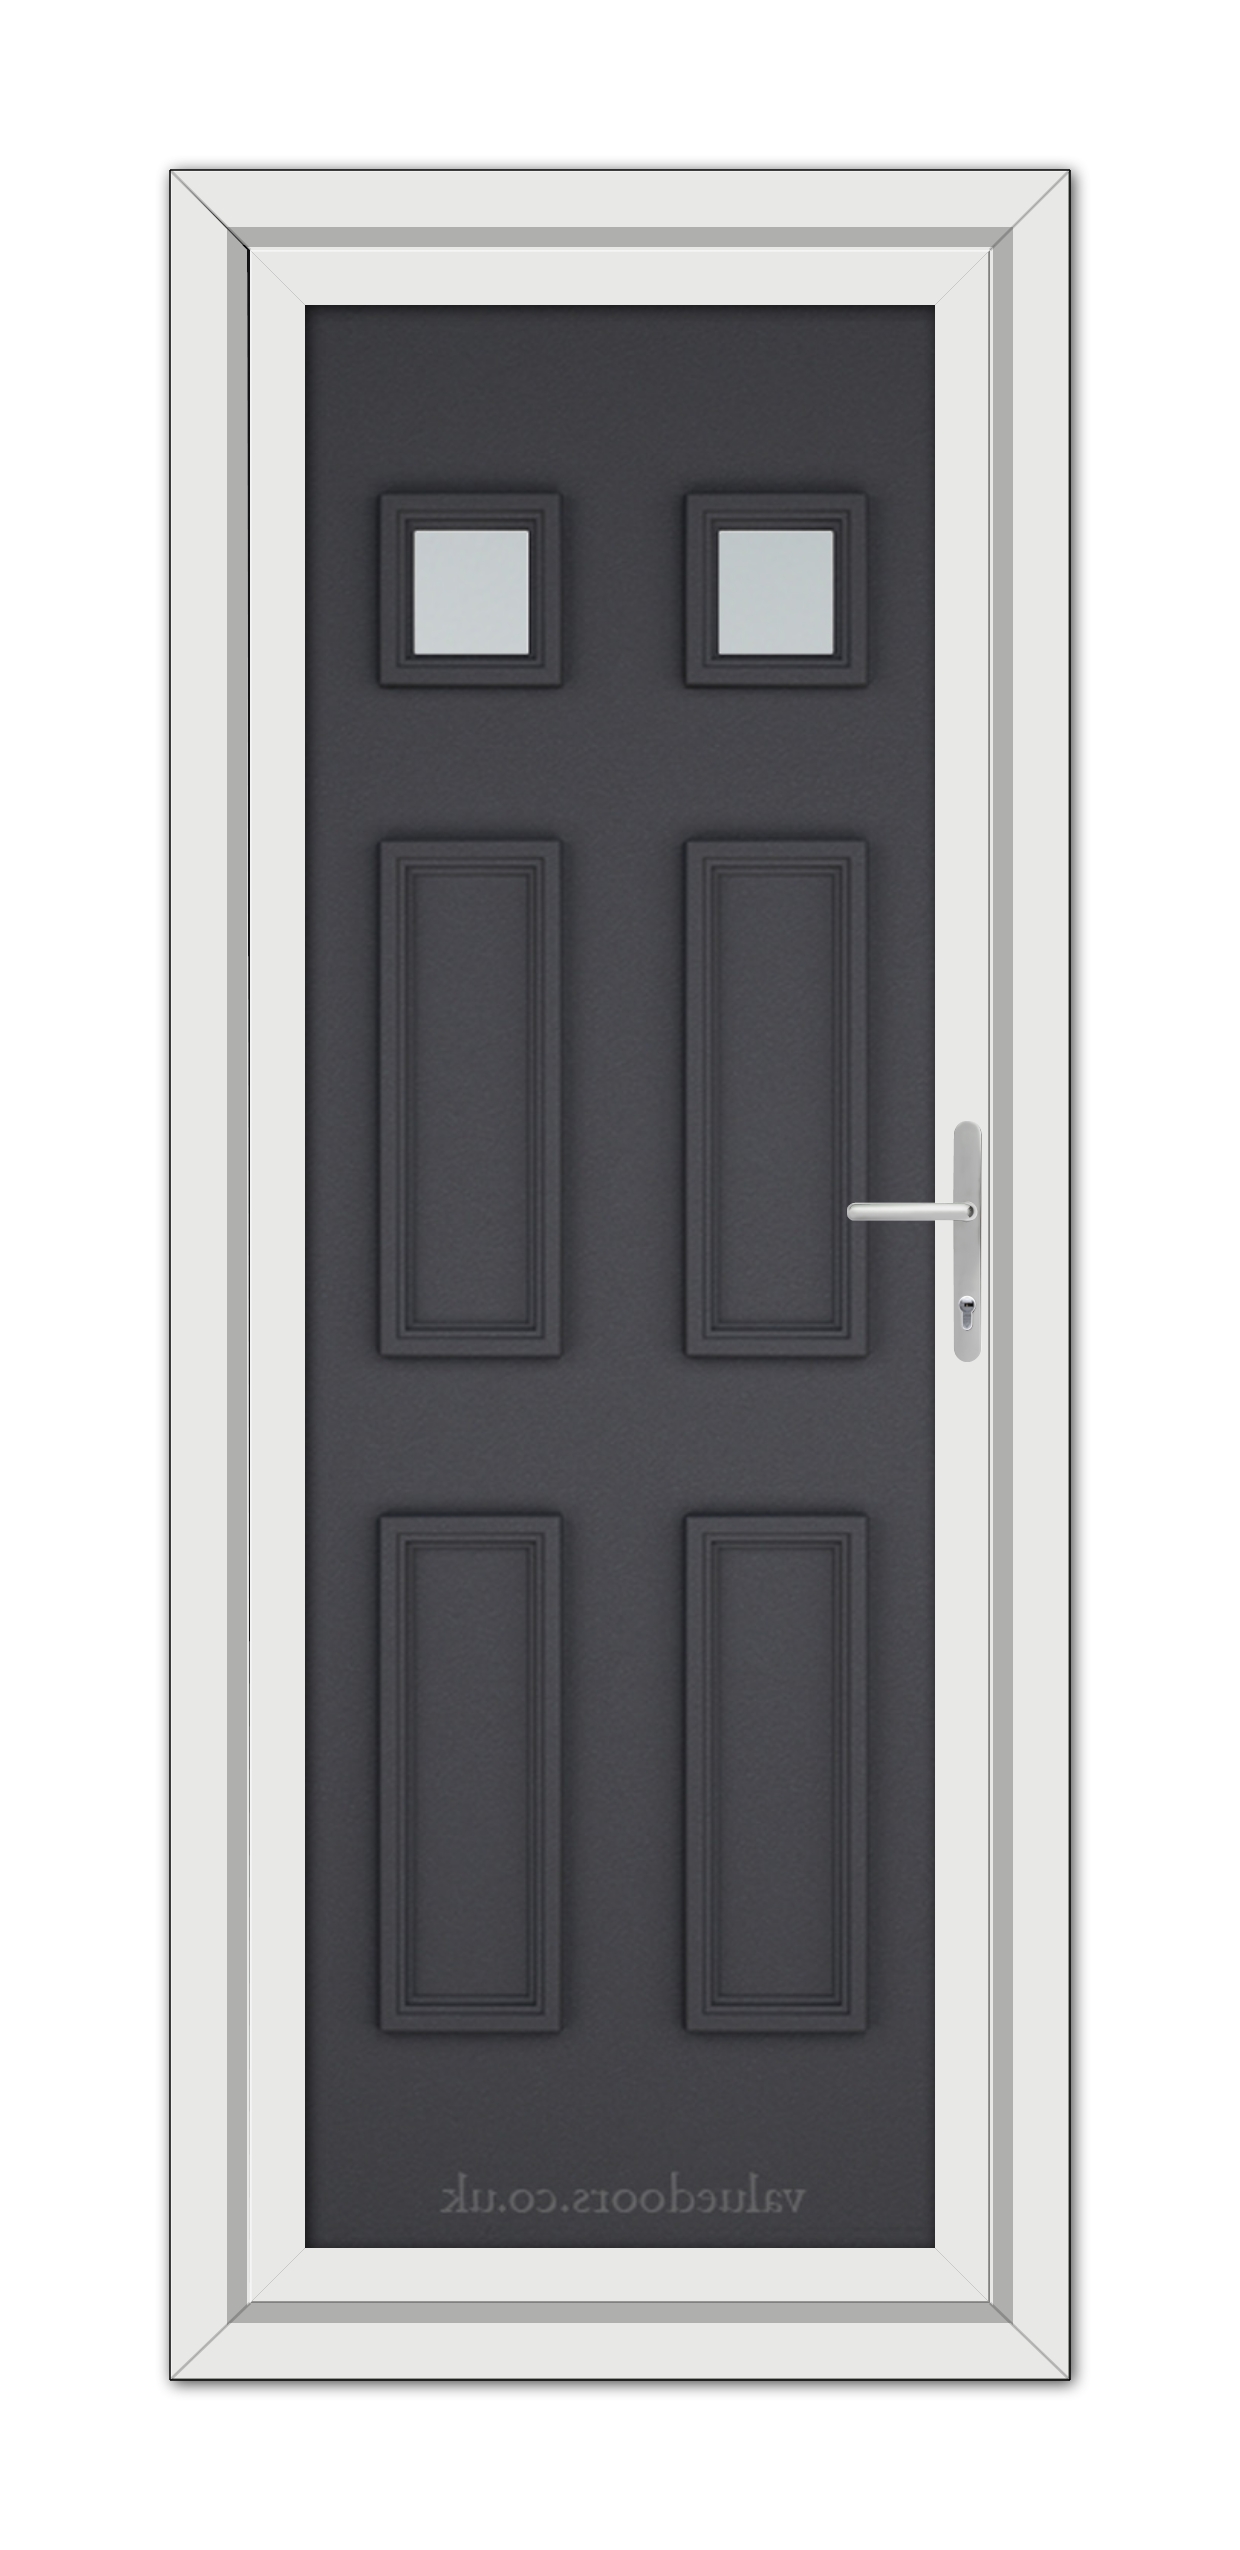 A Grey Grained Windsor uPVC Door with four recessed panels and two small square windows, framed in white, with a metallic handle on the right side.